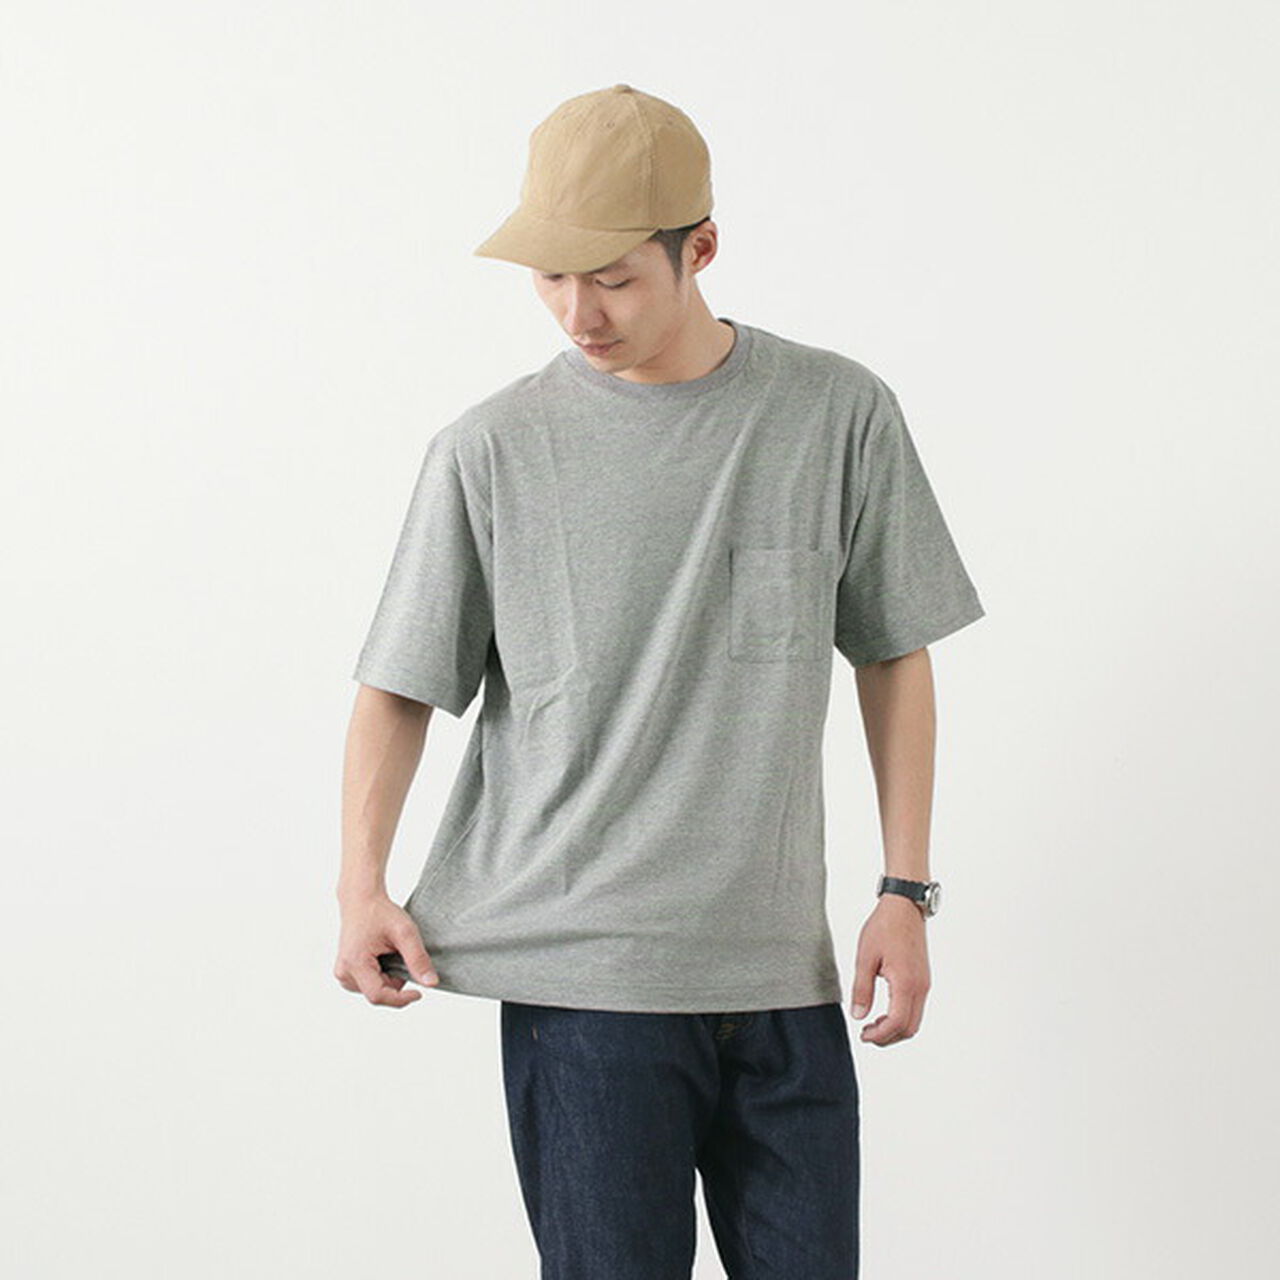 Crew Neck Pocket Tee / Loose Fit / Neon Yellow,Grey×NeonGreen, large image number 0